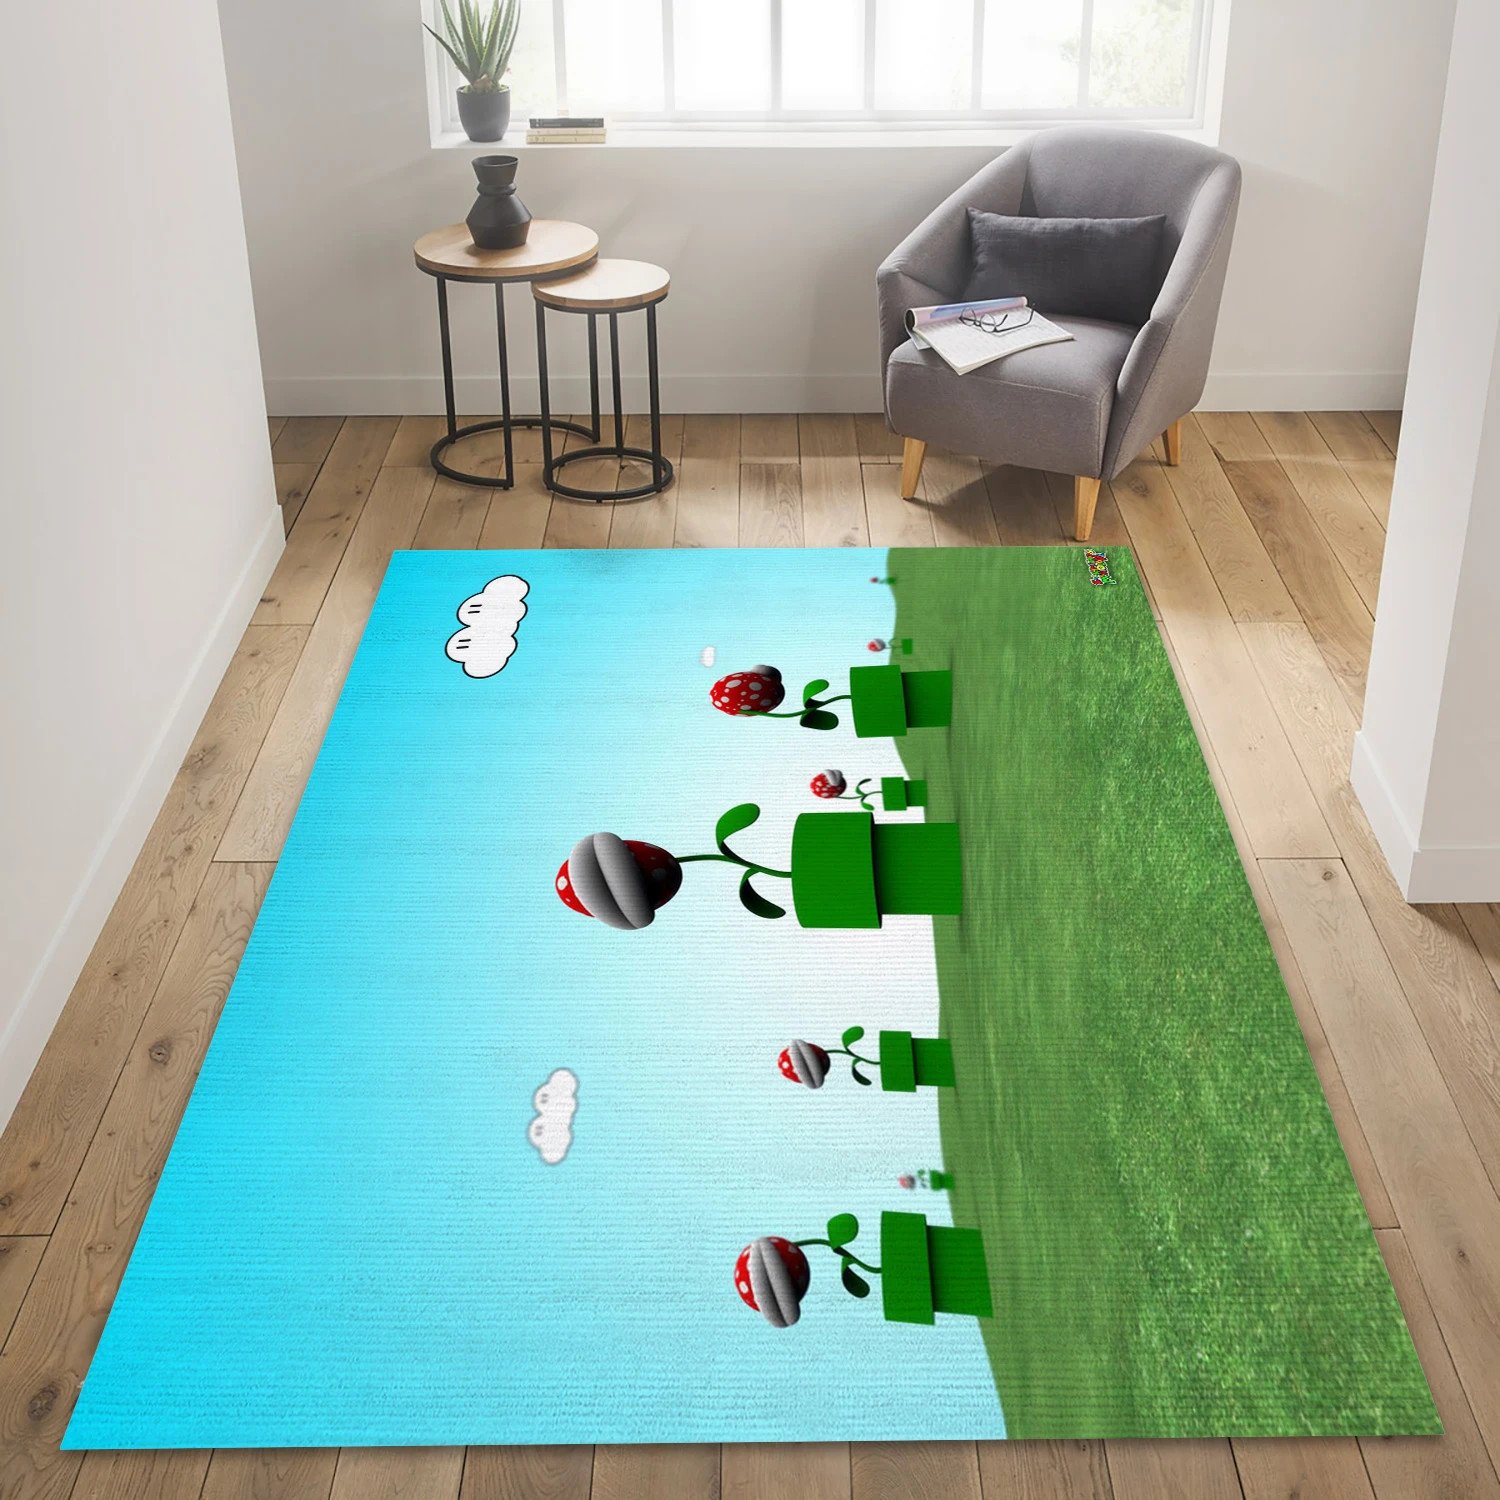 Mario Video Game Reangle Rug, Living Room Rug - Family Gift US Decor - Indoor Outdoor Rugs 2